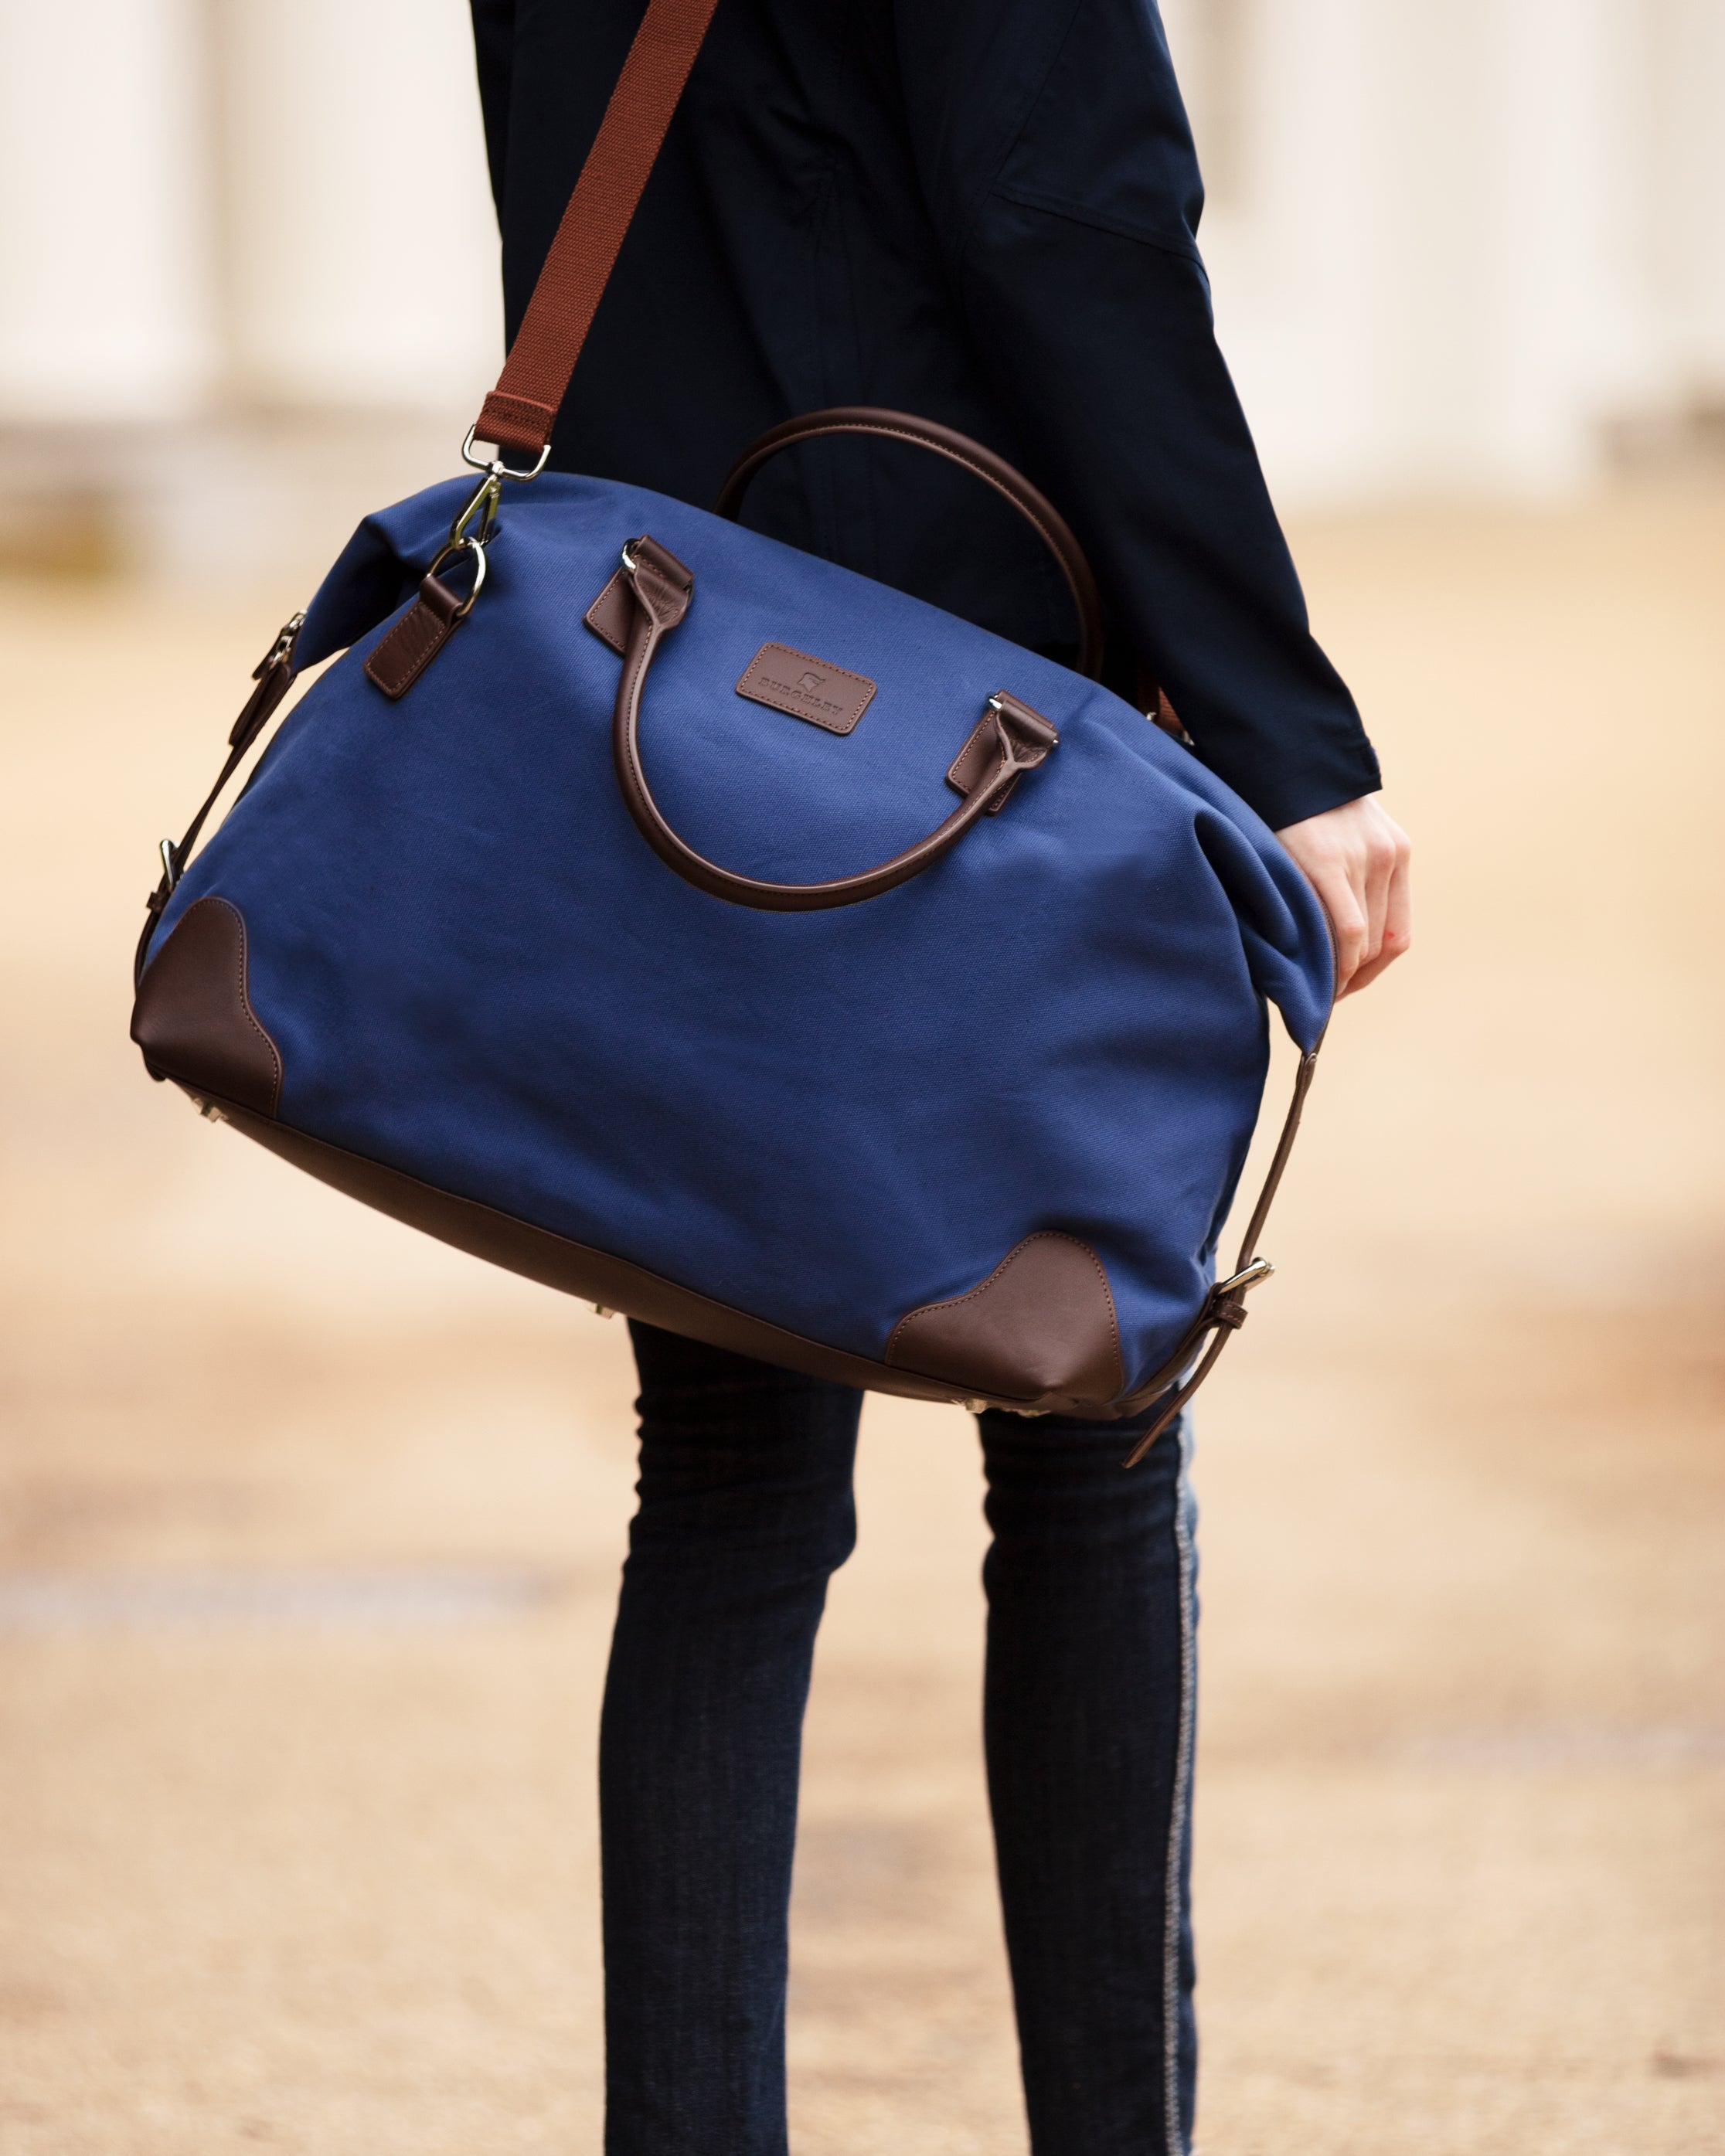 Boston - Full Leather Weekend Bag by Burghley Bags